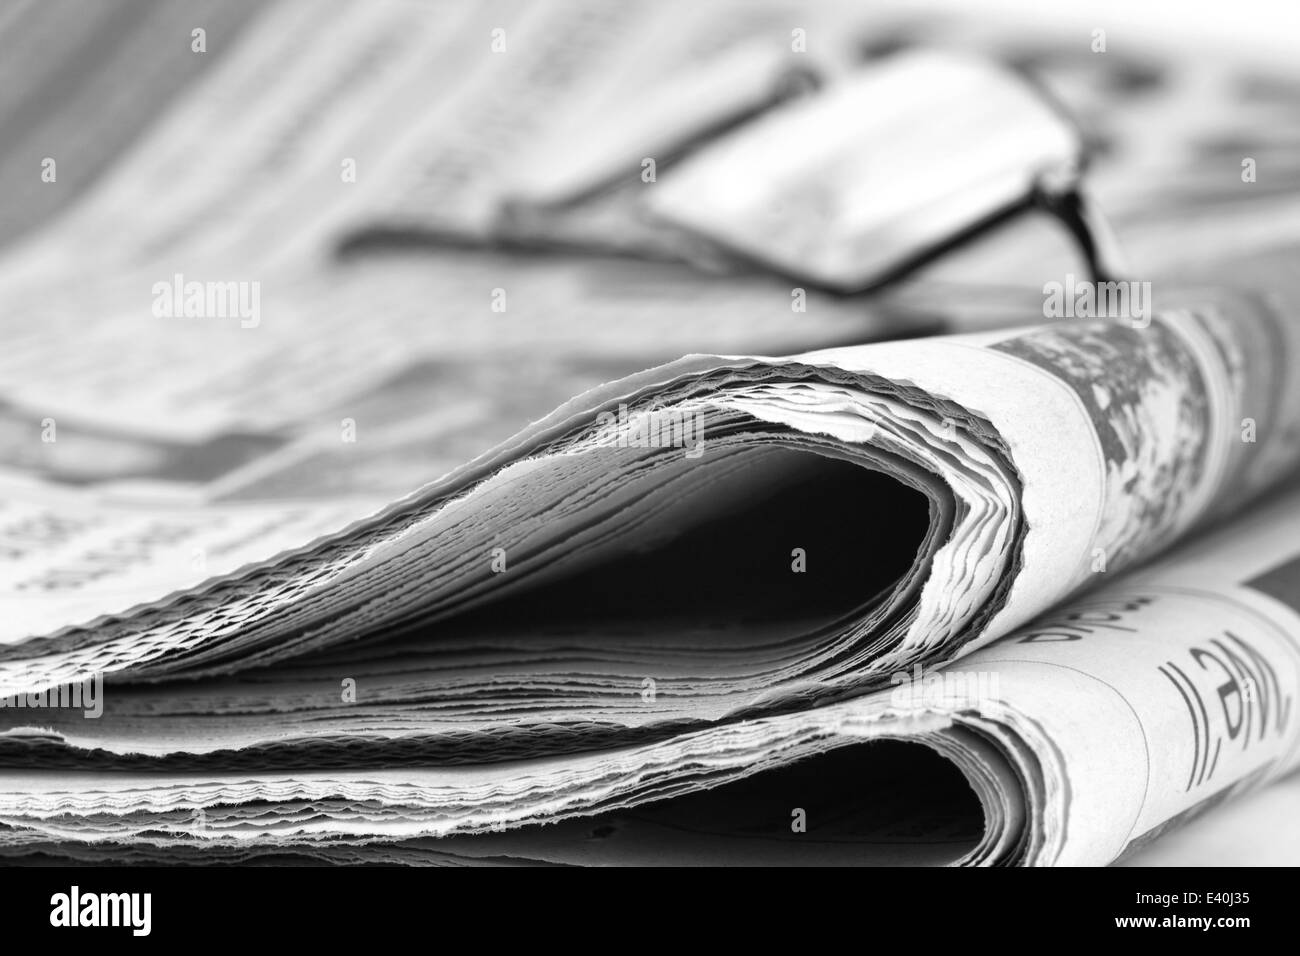 Newspaper folded up with specs Stock Photo